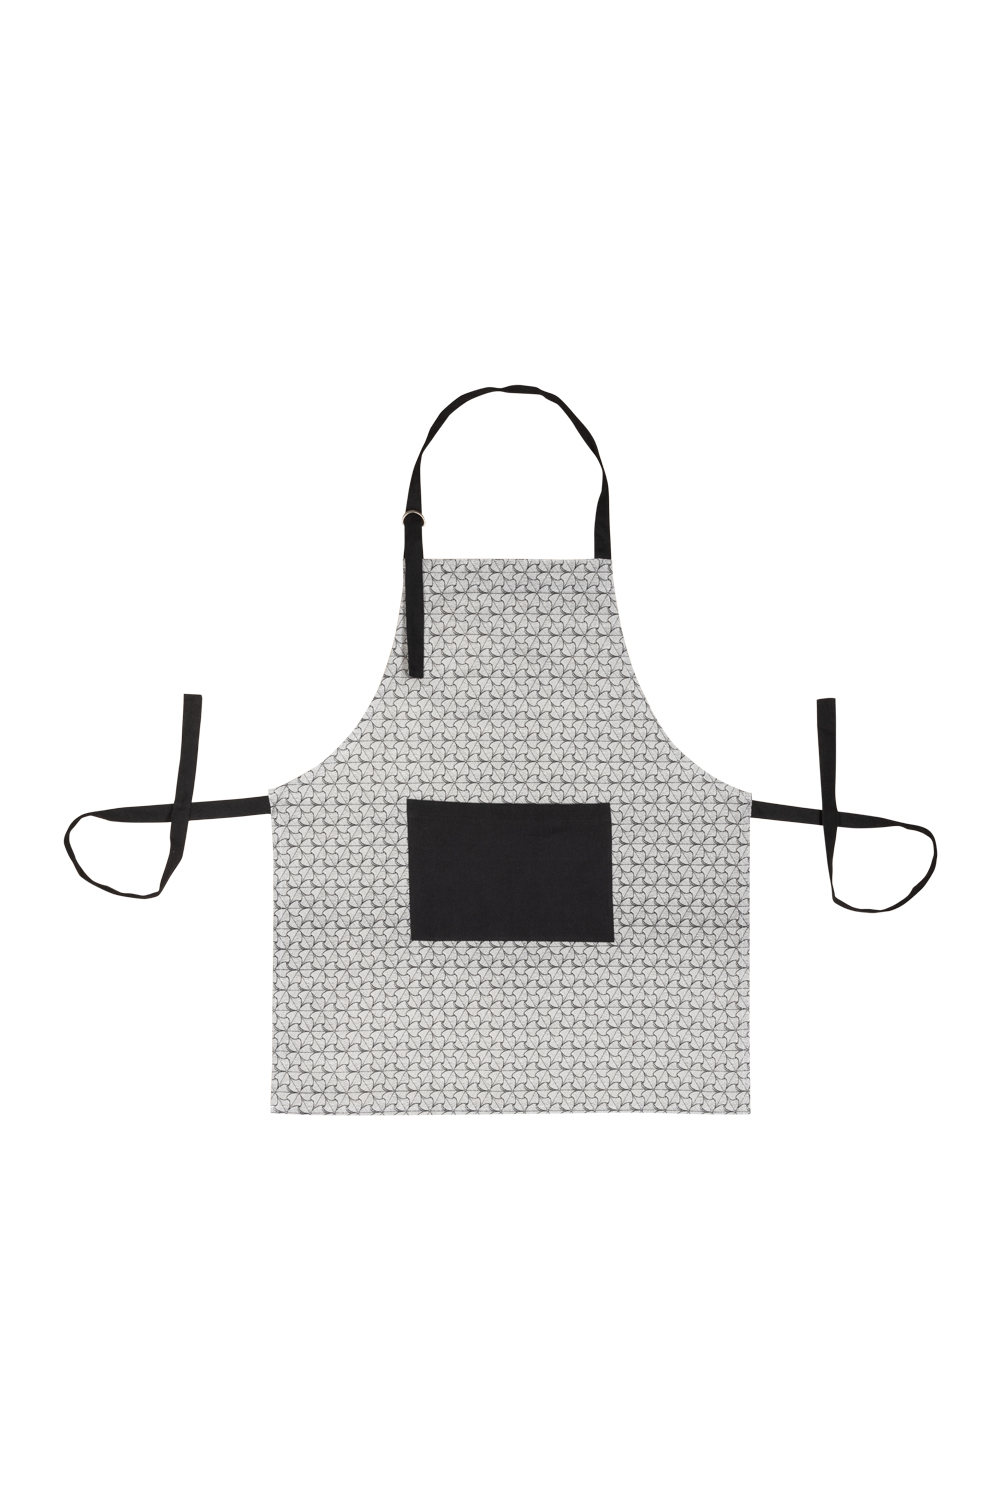 Tranquillo Kitchen Apron - Floral - Sustainable